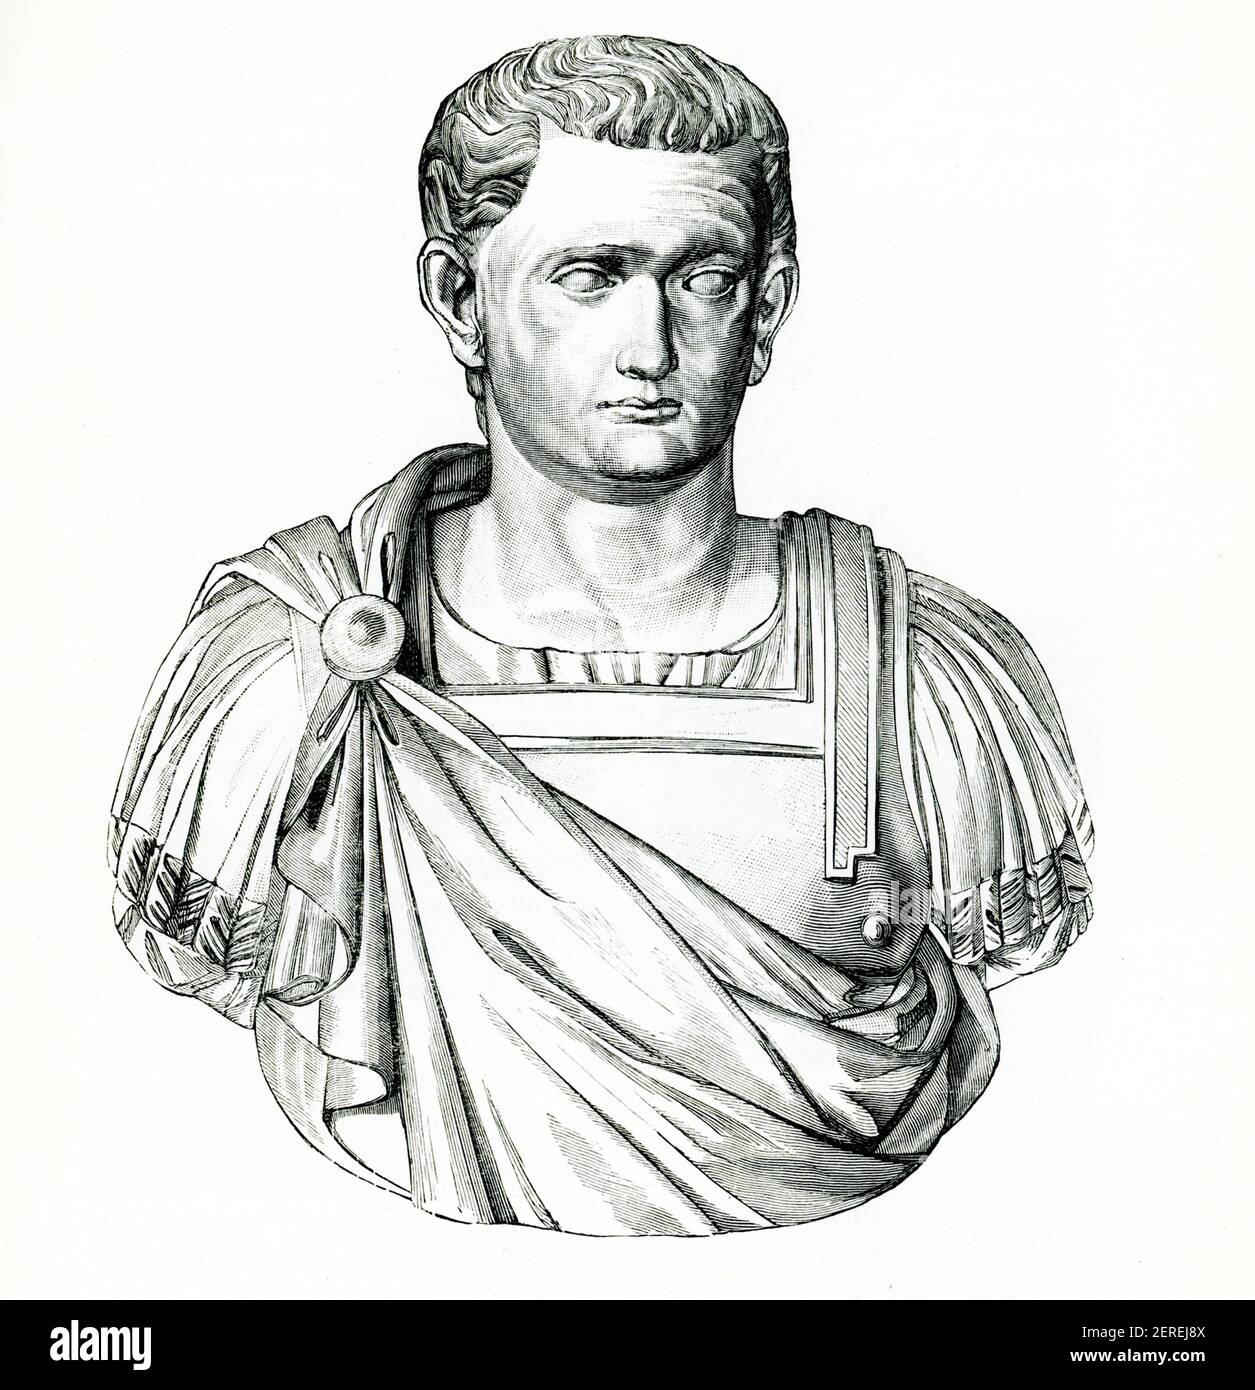 This 1880s illustration shows the bust of the Roman emperor Titus that is housed in the Uffizi Gallery in Florence, Italy. Titus was Roman emperor from 79 to 81. A member of the Flavian dynasty, Titus succeeded his father Vespasian upon his death. Before becoming emperor, Titus gained renown as a military commander, serving under his father in Judea during the First Jewish–Roman War. Stock Photo